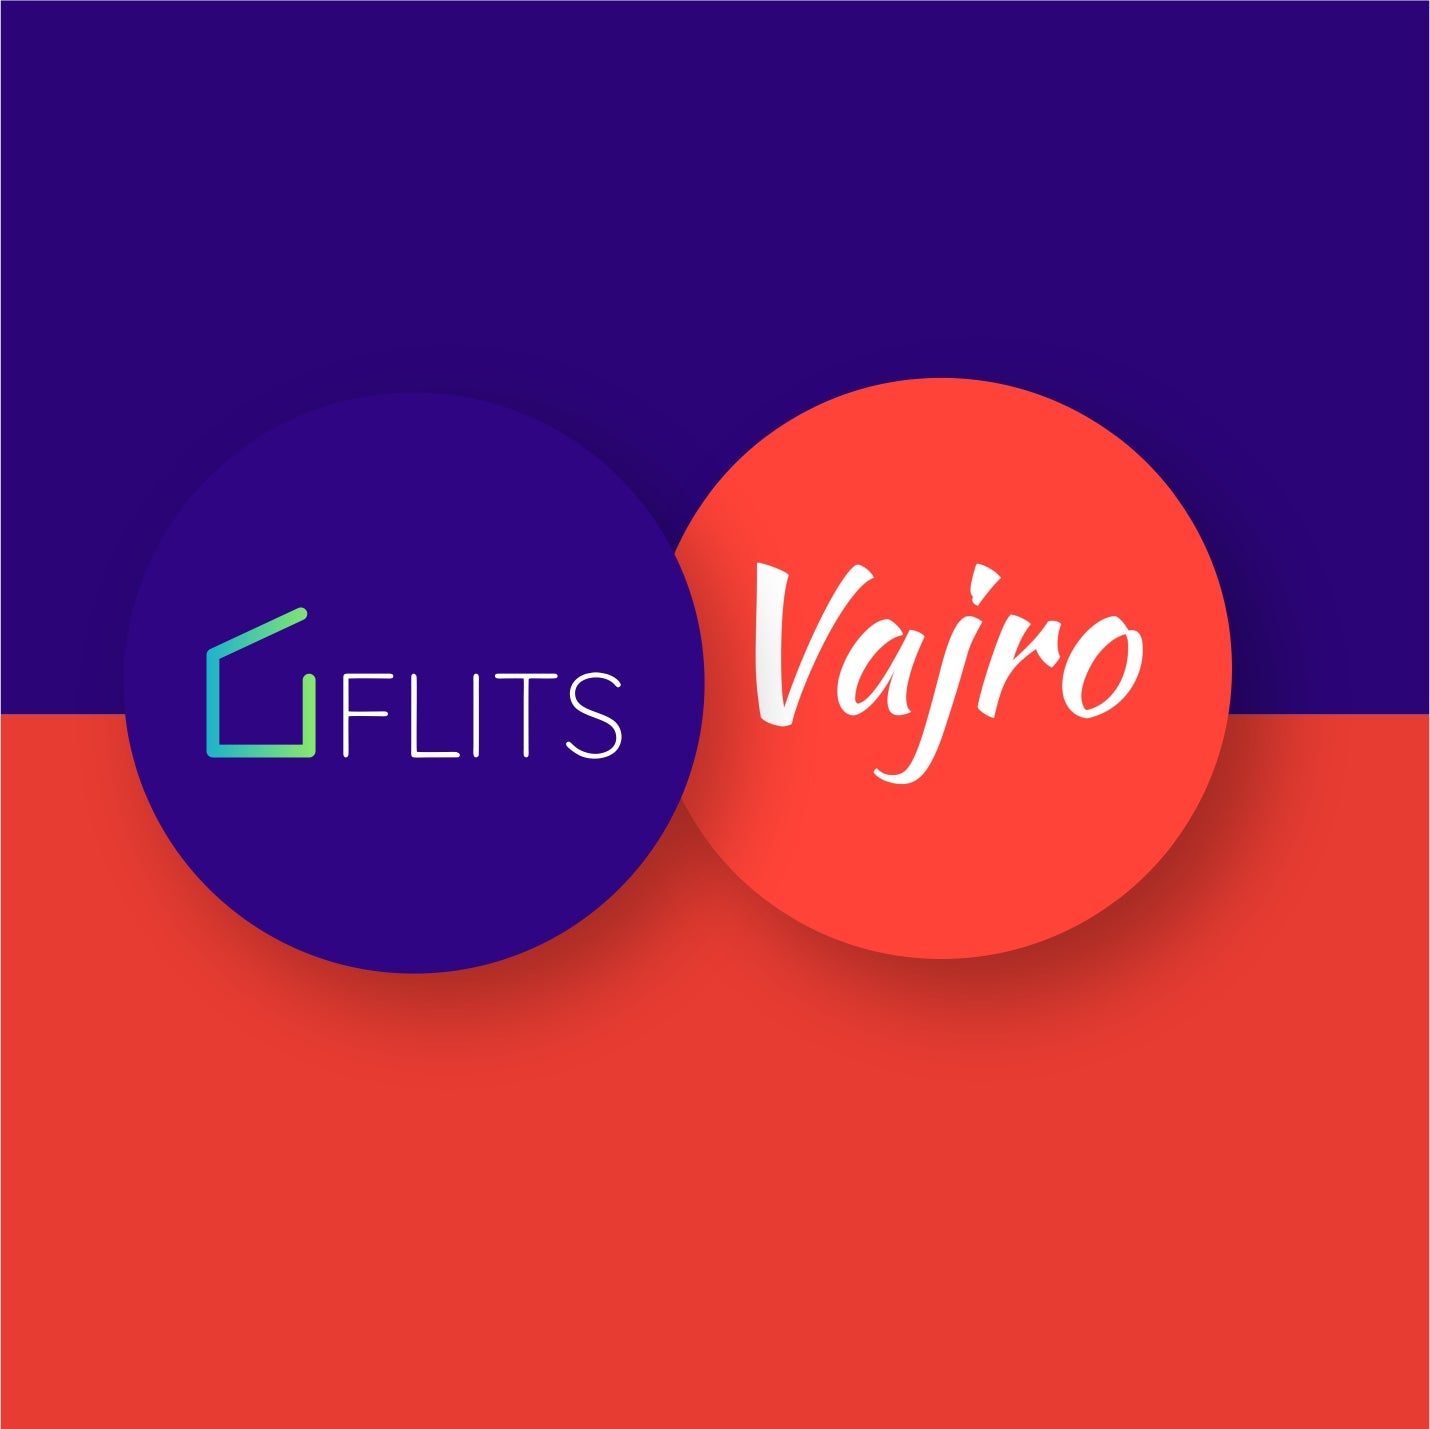 Flits is Now integrated with Vajro : Access all Flits’ features through Vajro Mobile App